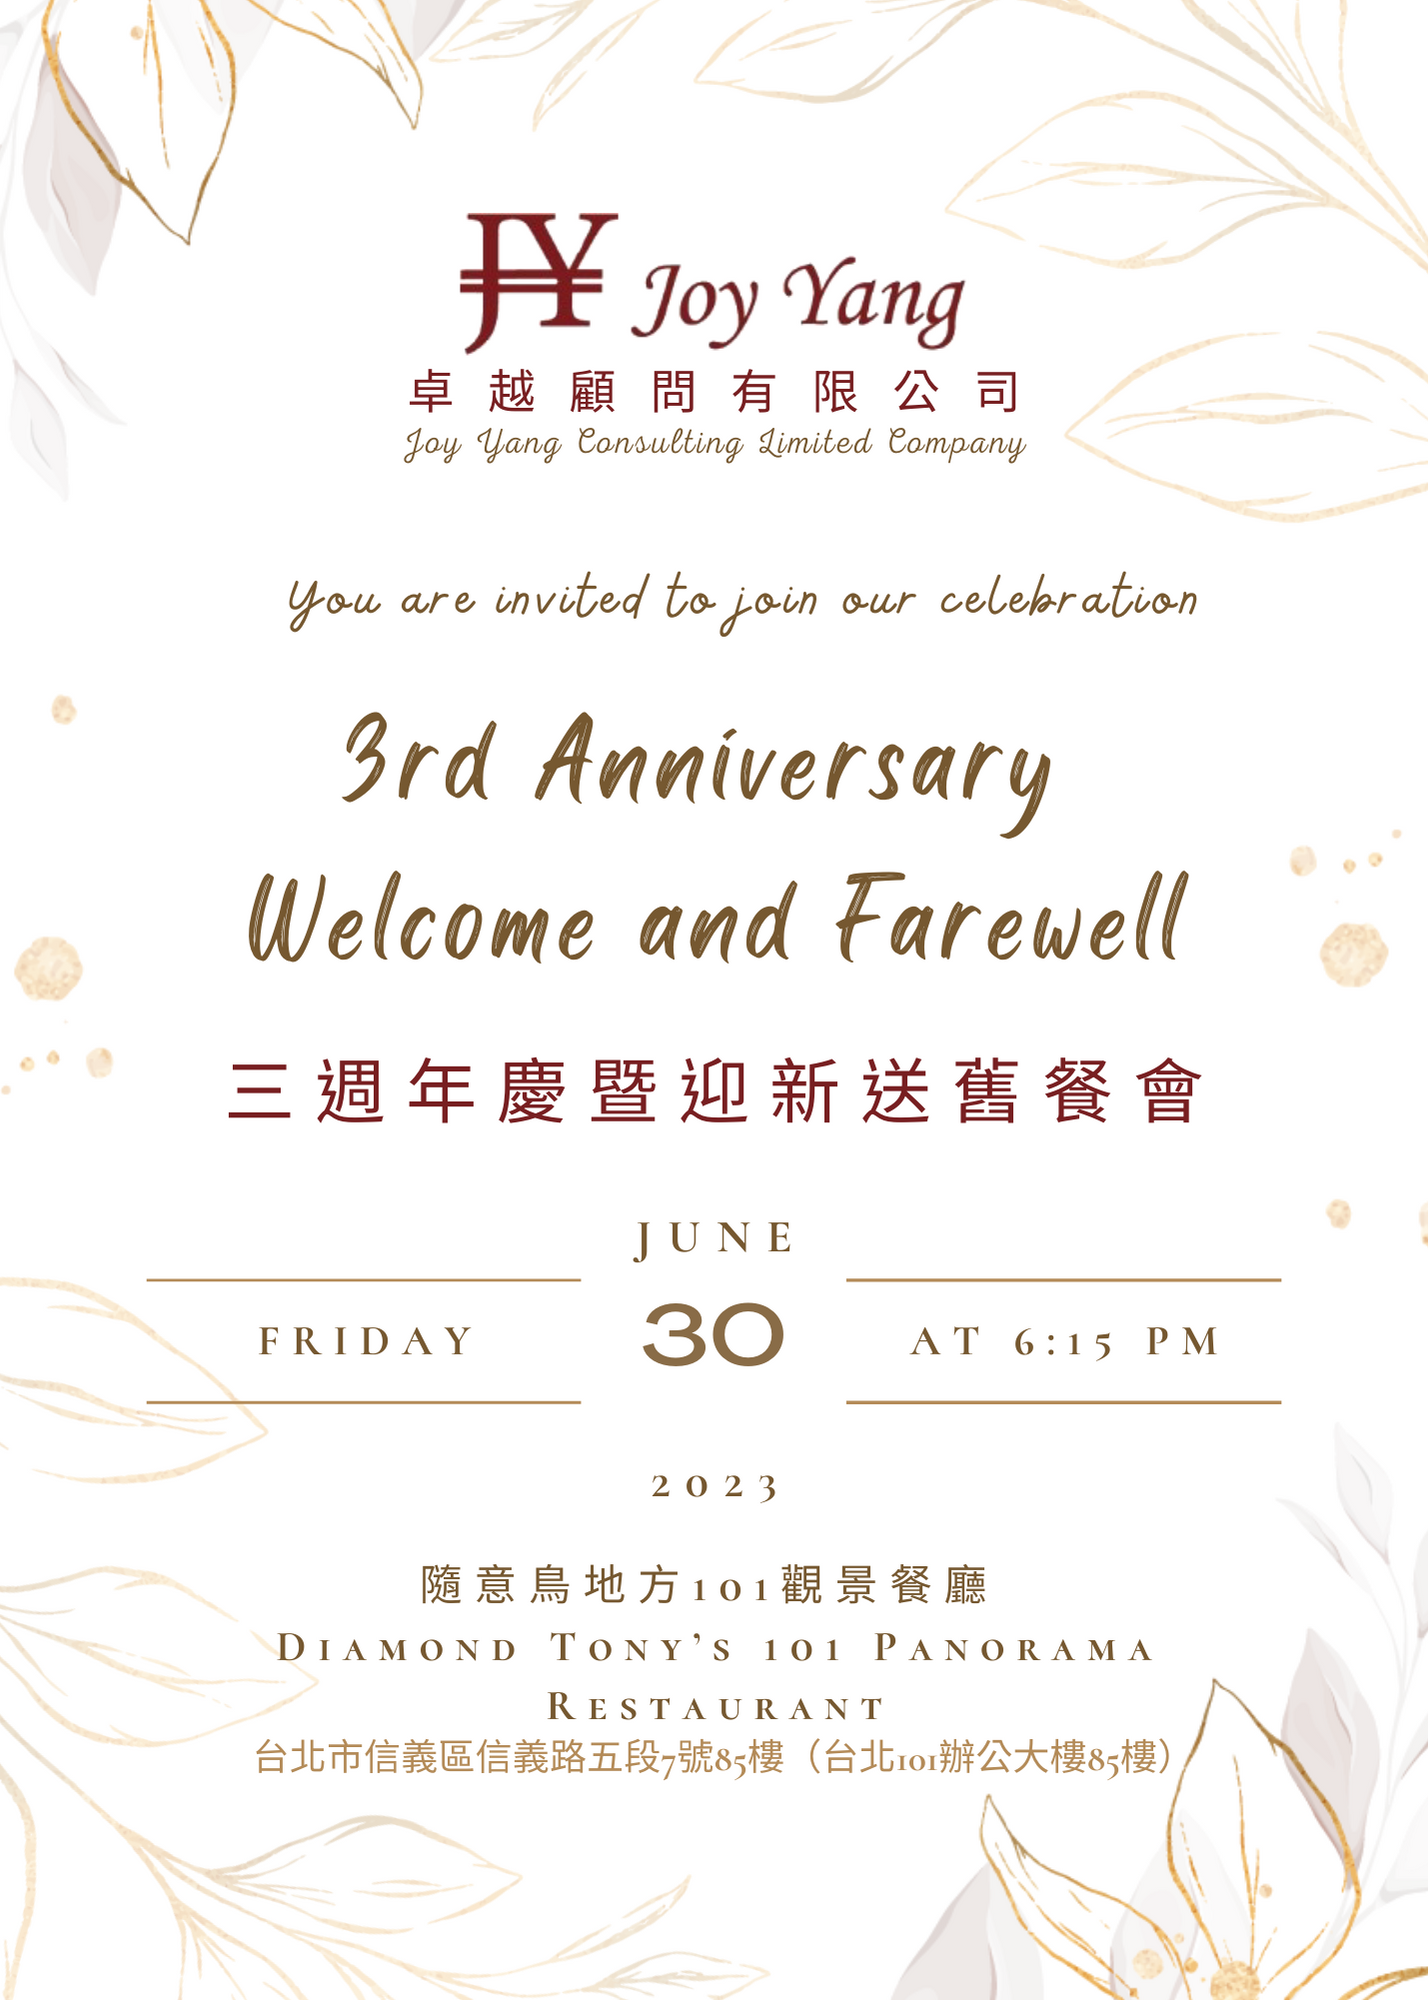 2023 3rd Anniversay,Welcome and Farewell Celebration